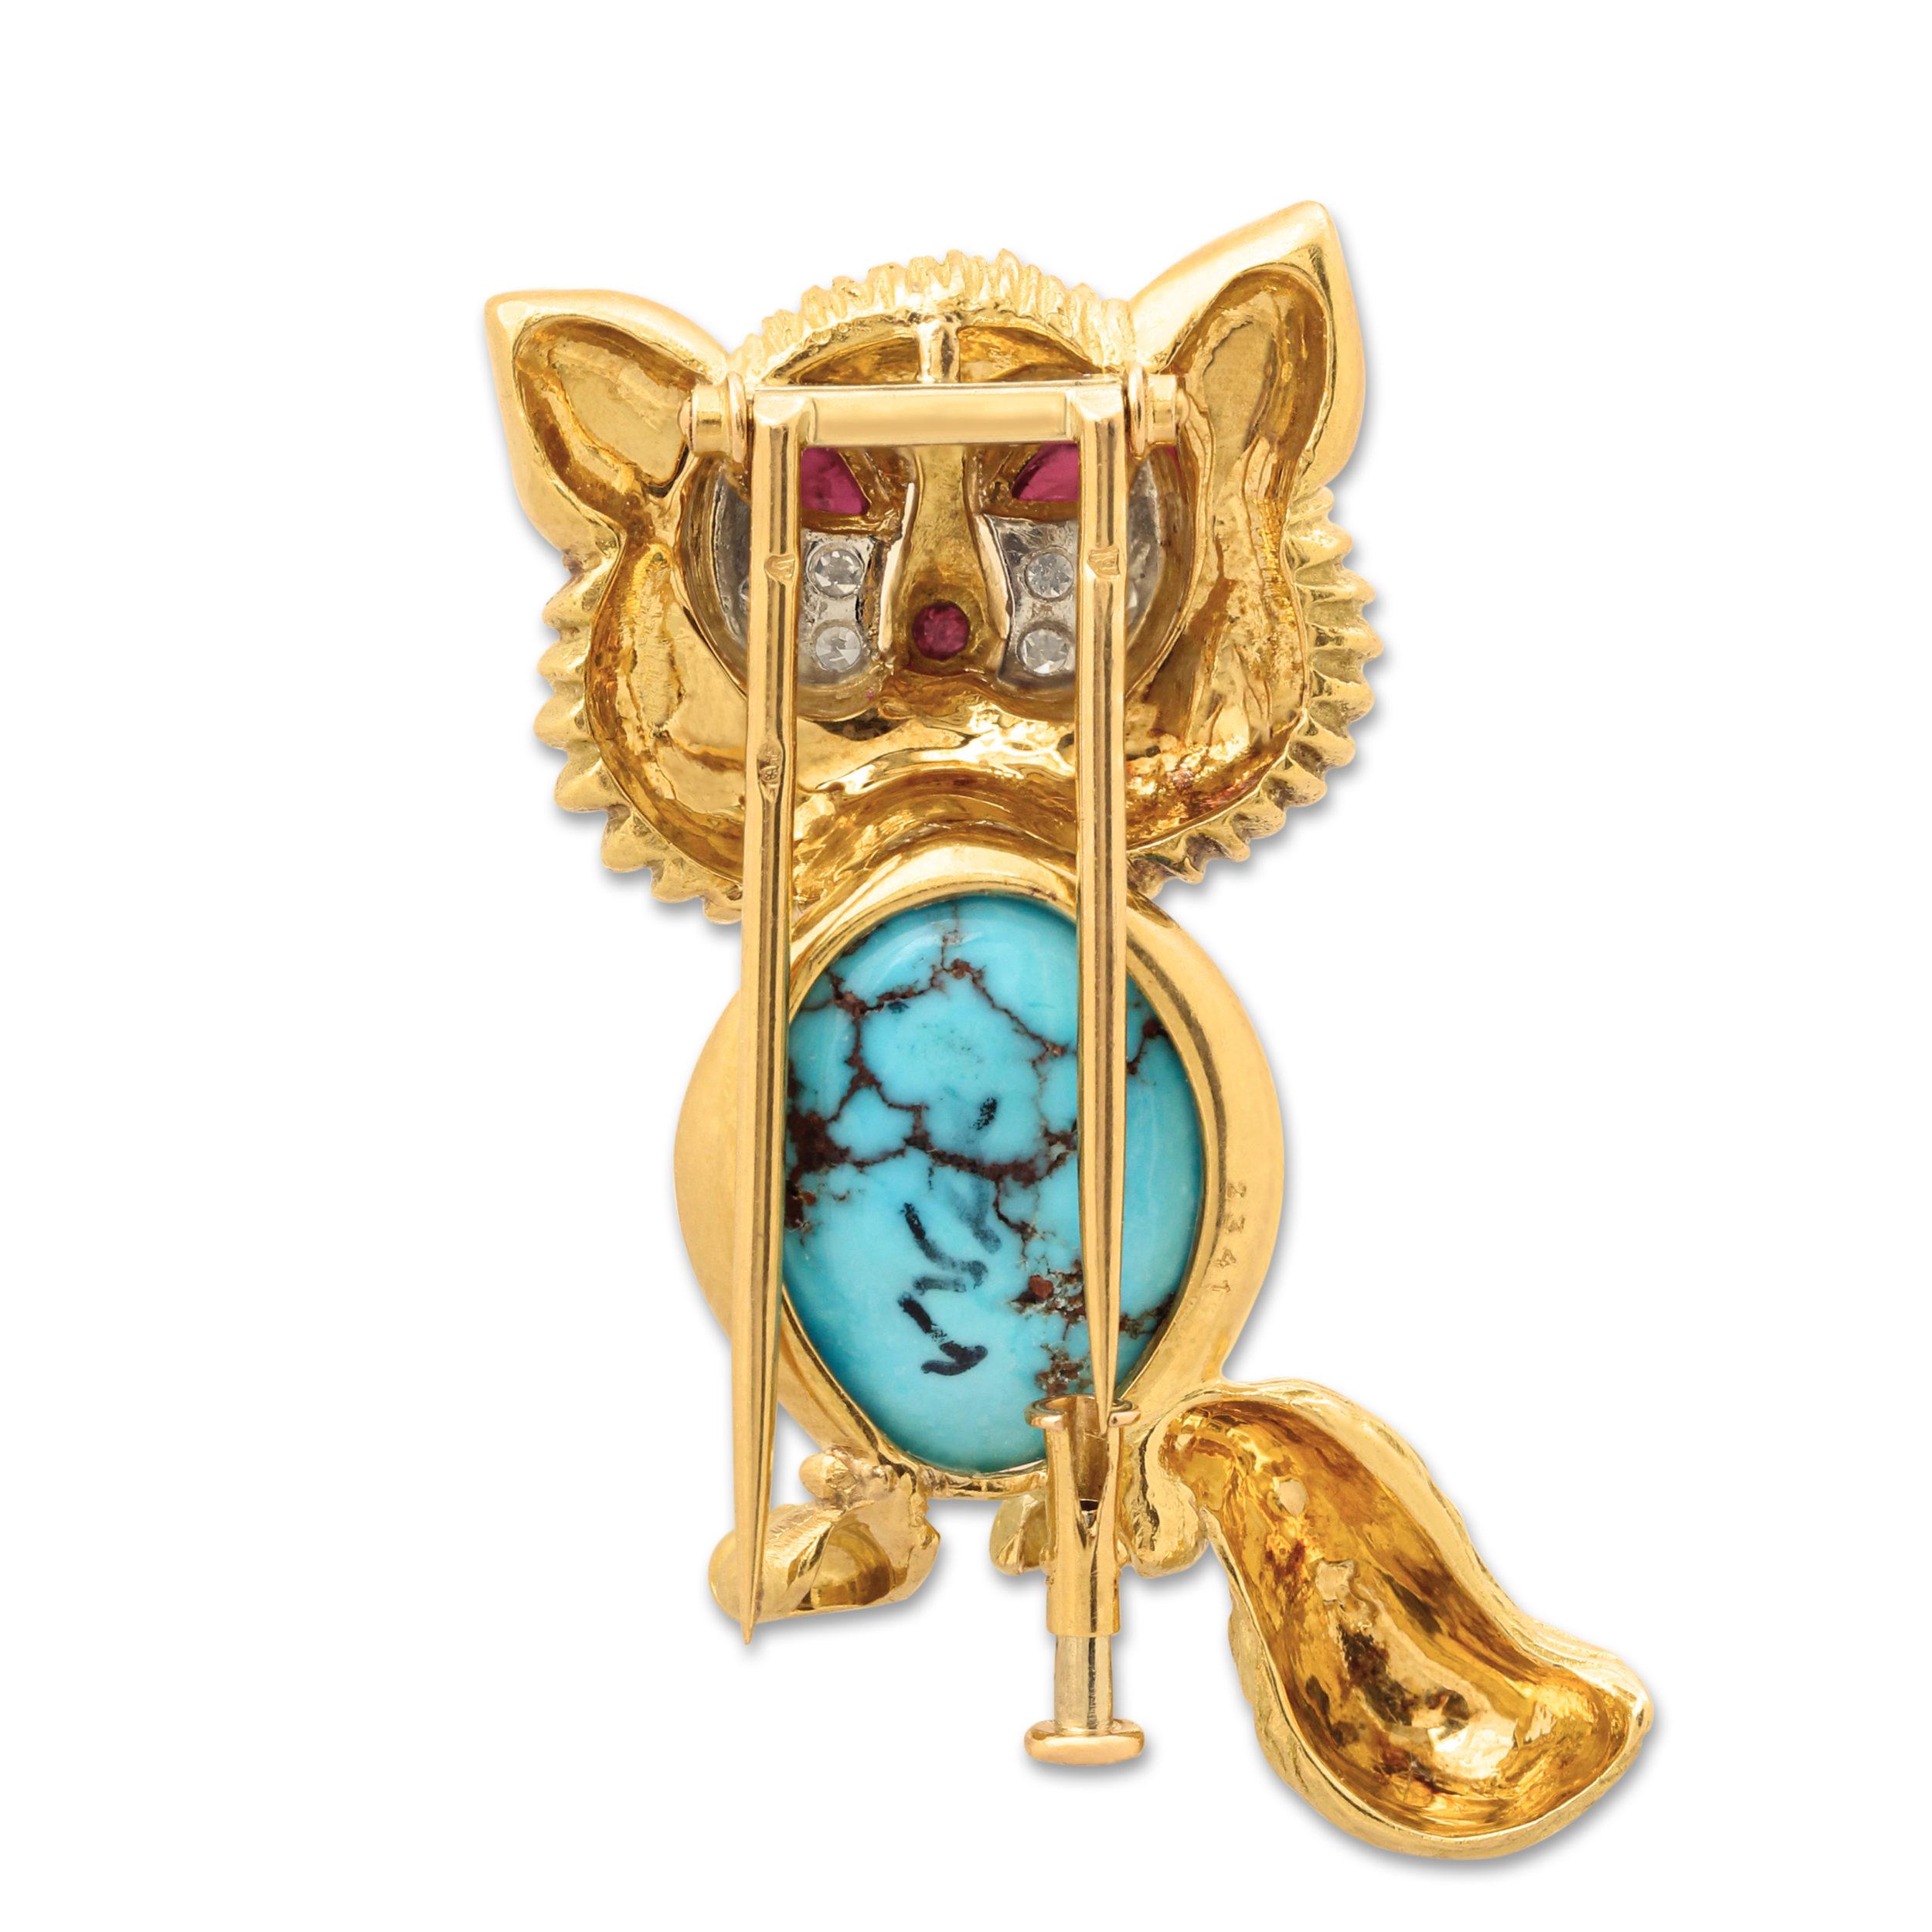 A mid-century gold and gem set cat brooch by Cartier. This charming multi gem creation is set at the centre with a vibrant cabochon turquoise and ruby eyes surrounded by diamonds all set in textured 18k yellow gold. 